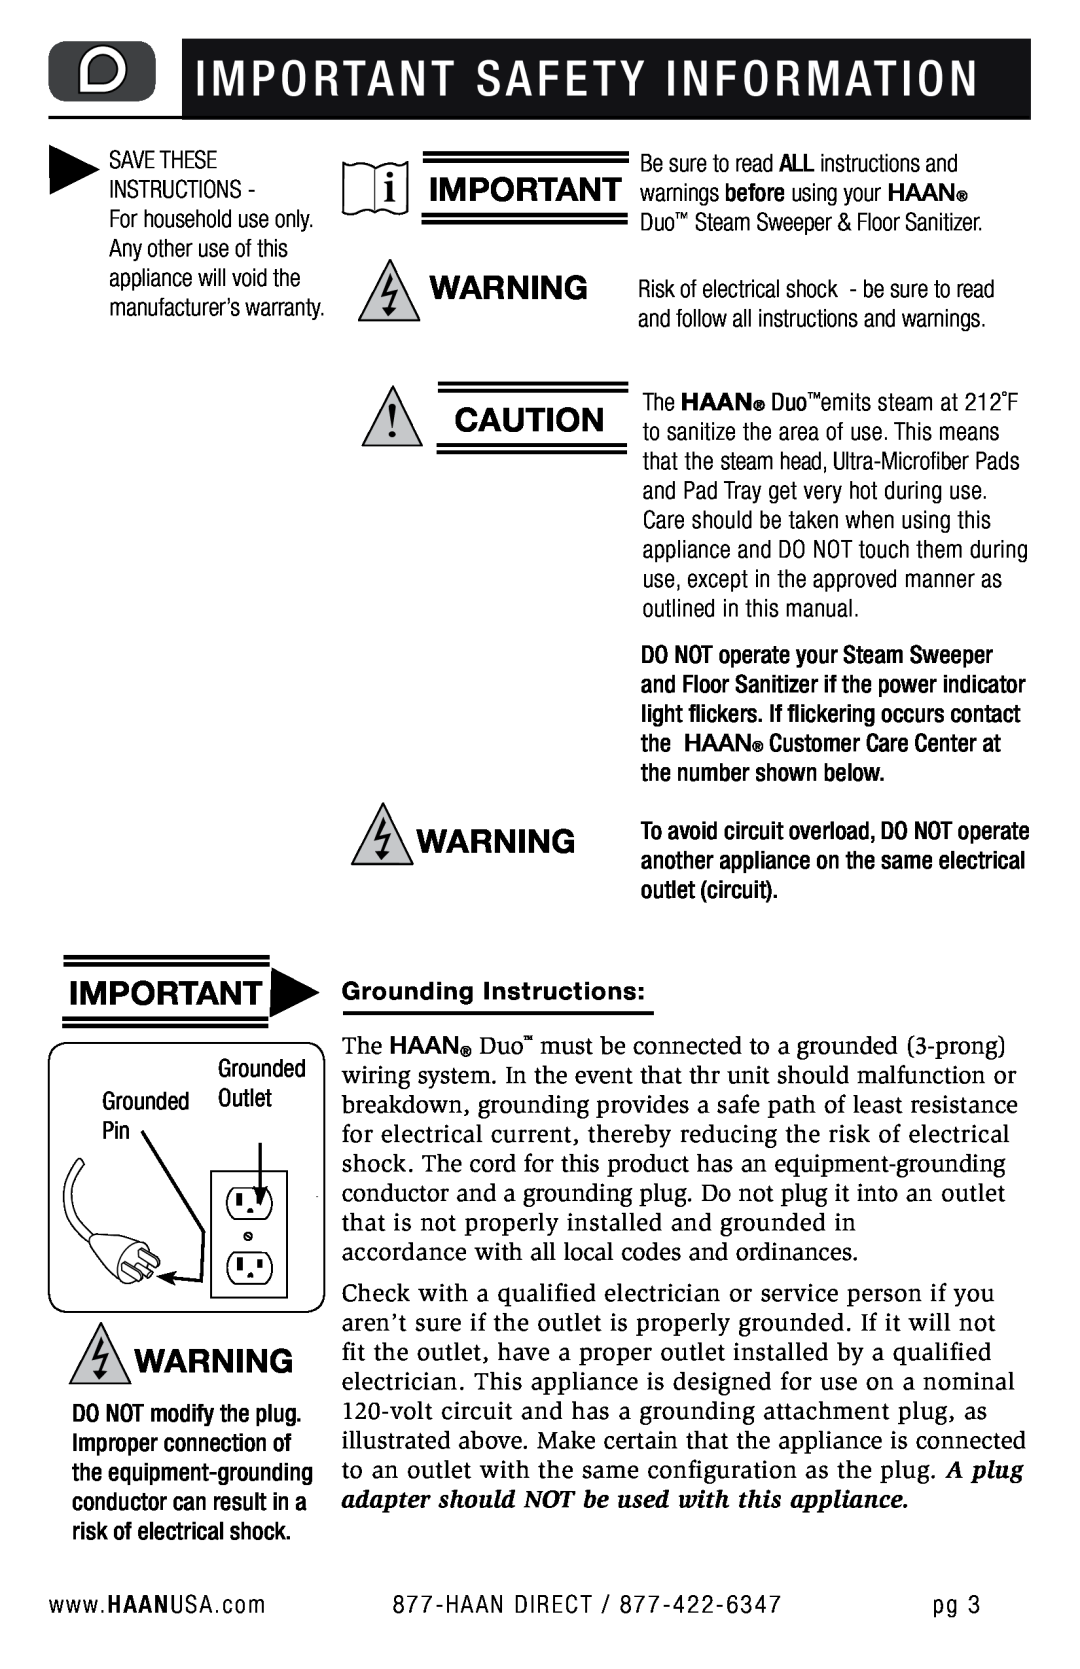 Haan HD-50 user manual Im p o rta nt Safety Information, Grounding Instructions 